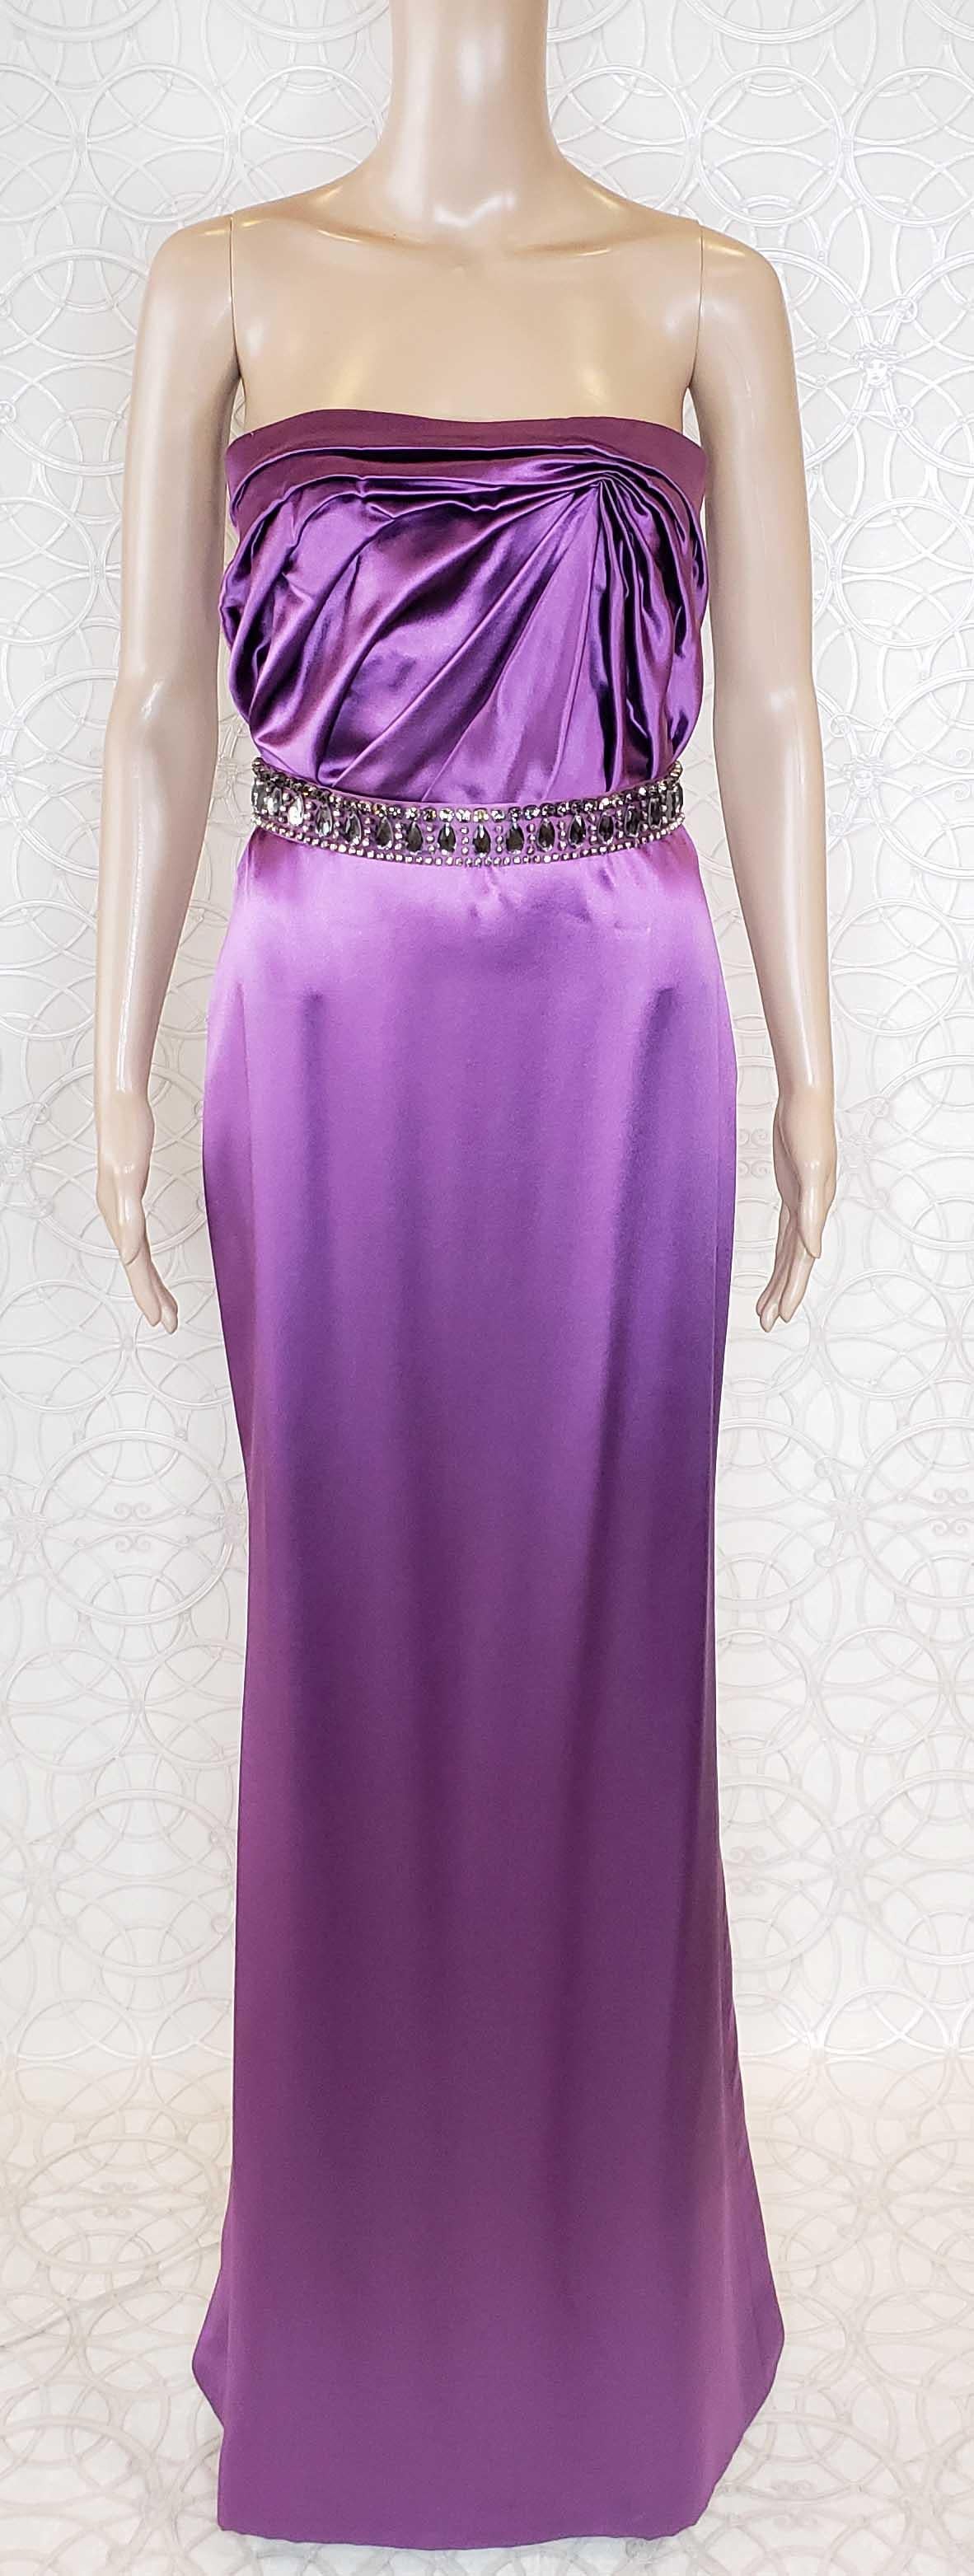  VERSACE


This Versace dress is simply stunning.



Super star's choice for the red carpet event in Paris! 



Amethyst color, strapless design and artfully crystal embellished waist - ensure a stunning silhouette. 





Content:100% silk

Lining: